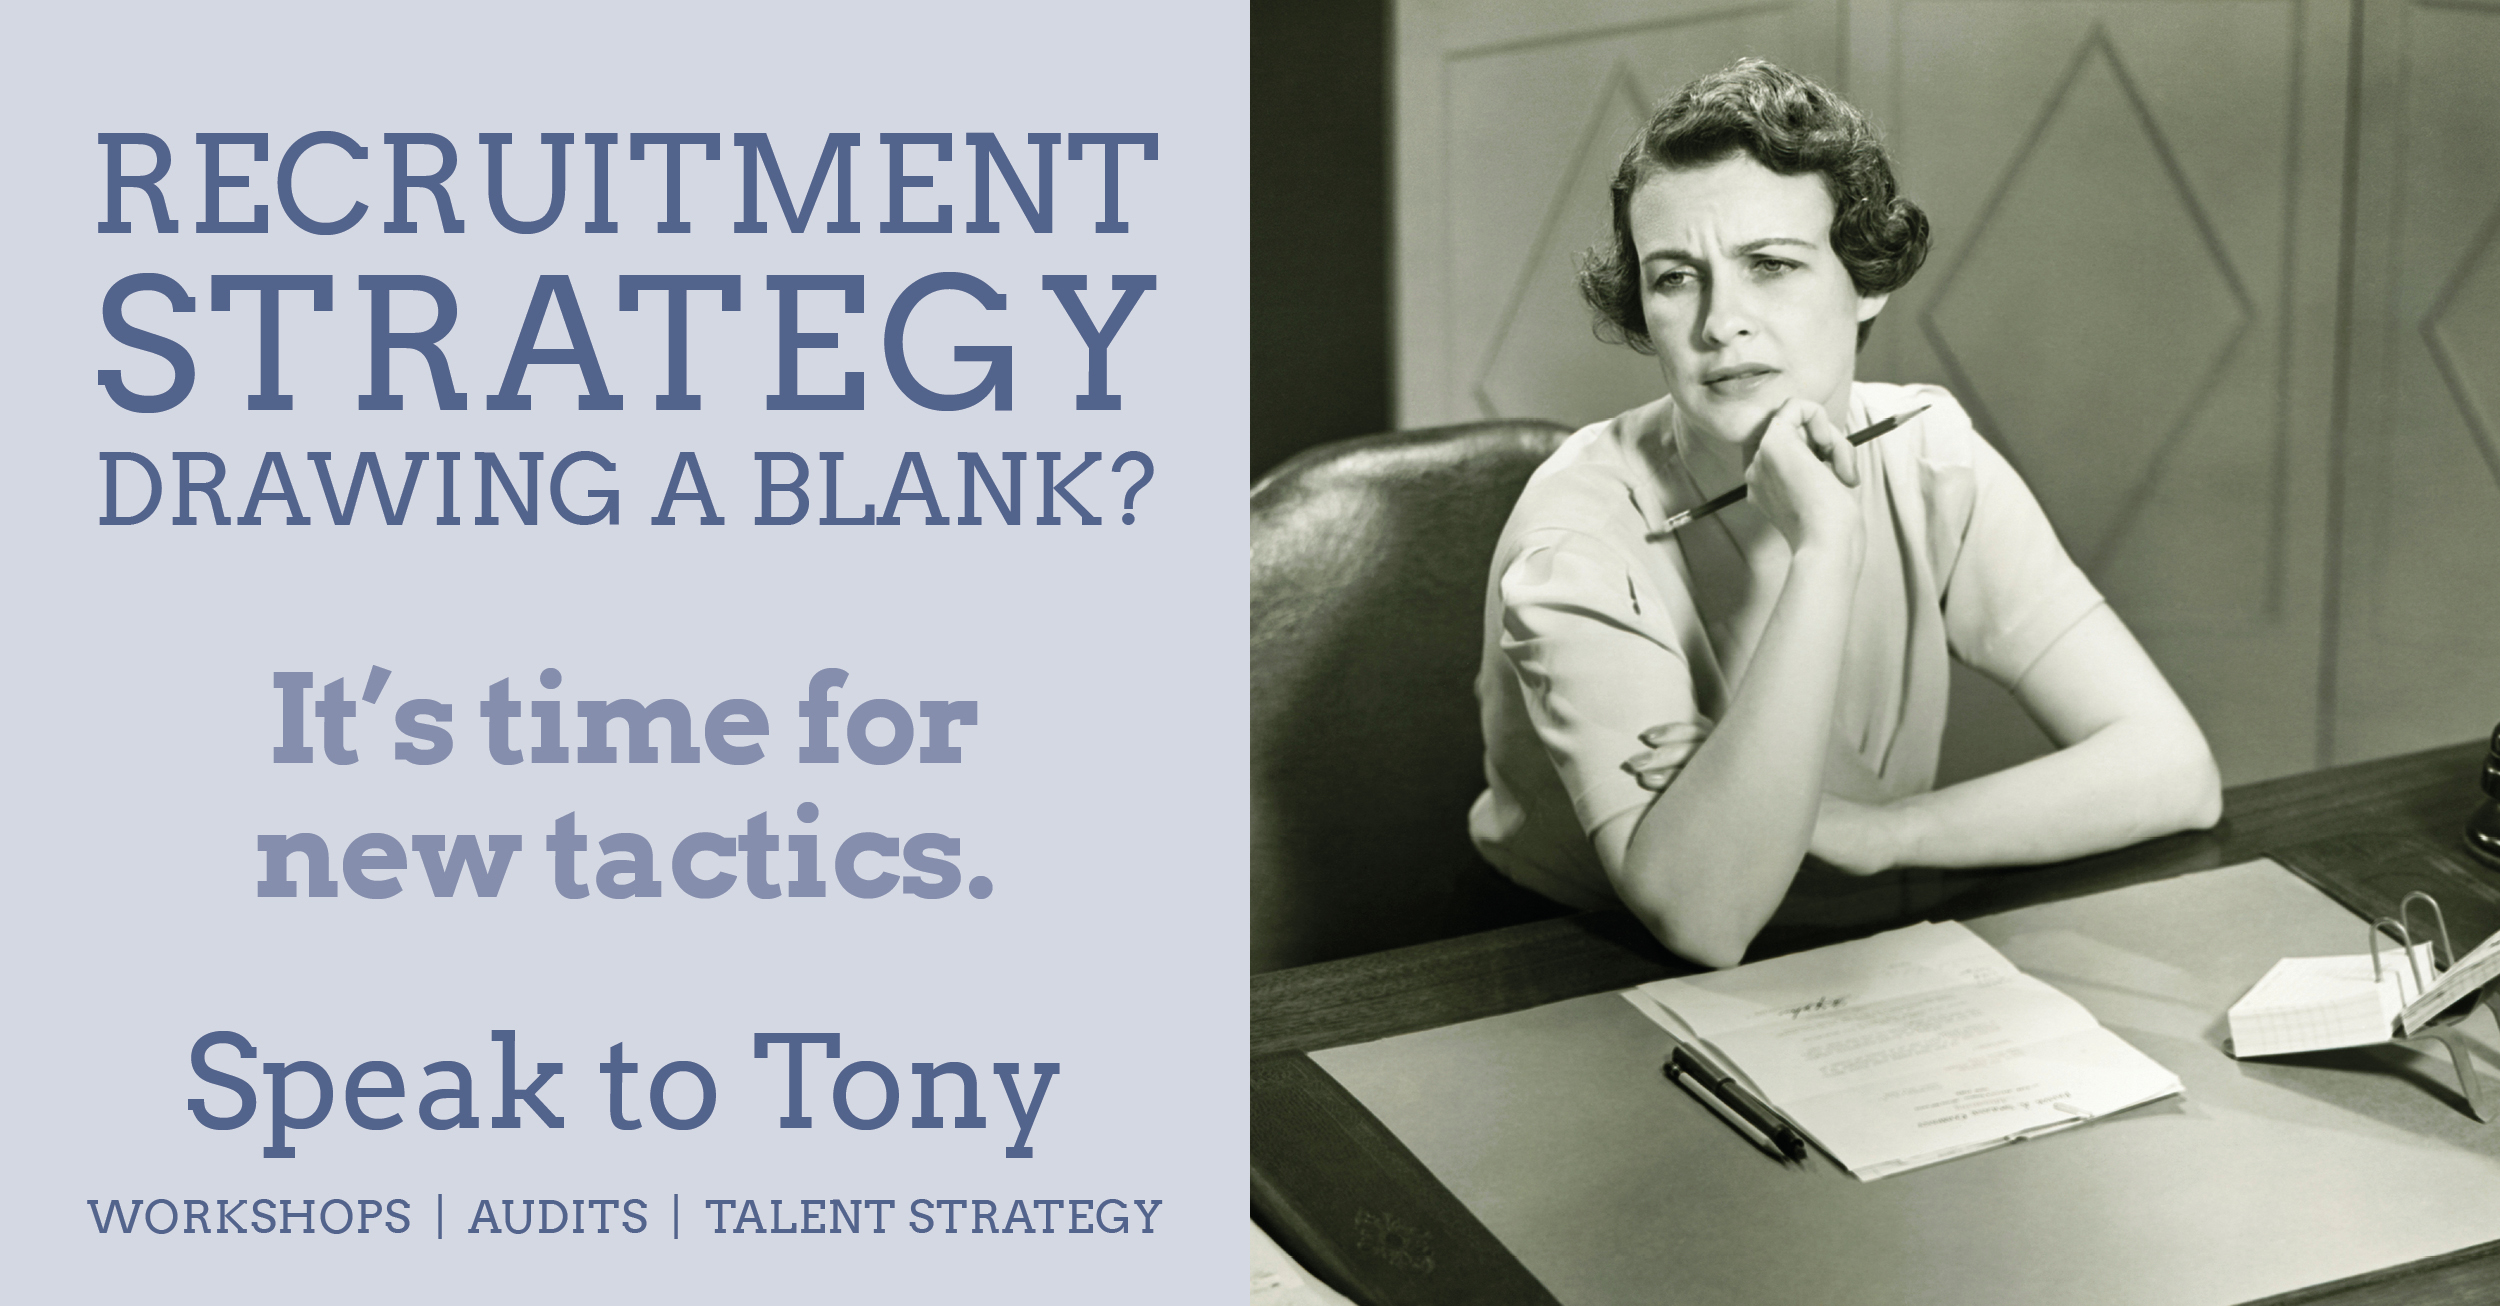 If your recruitment strategy's drawing a blank, speak to Tony